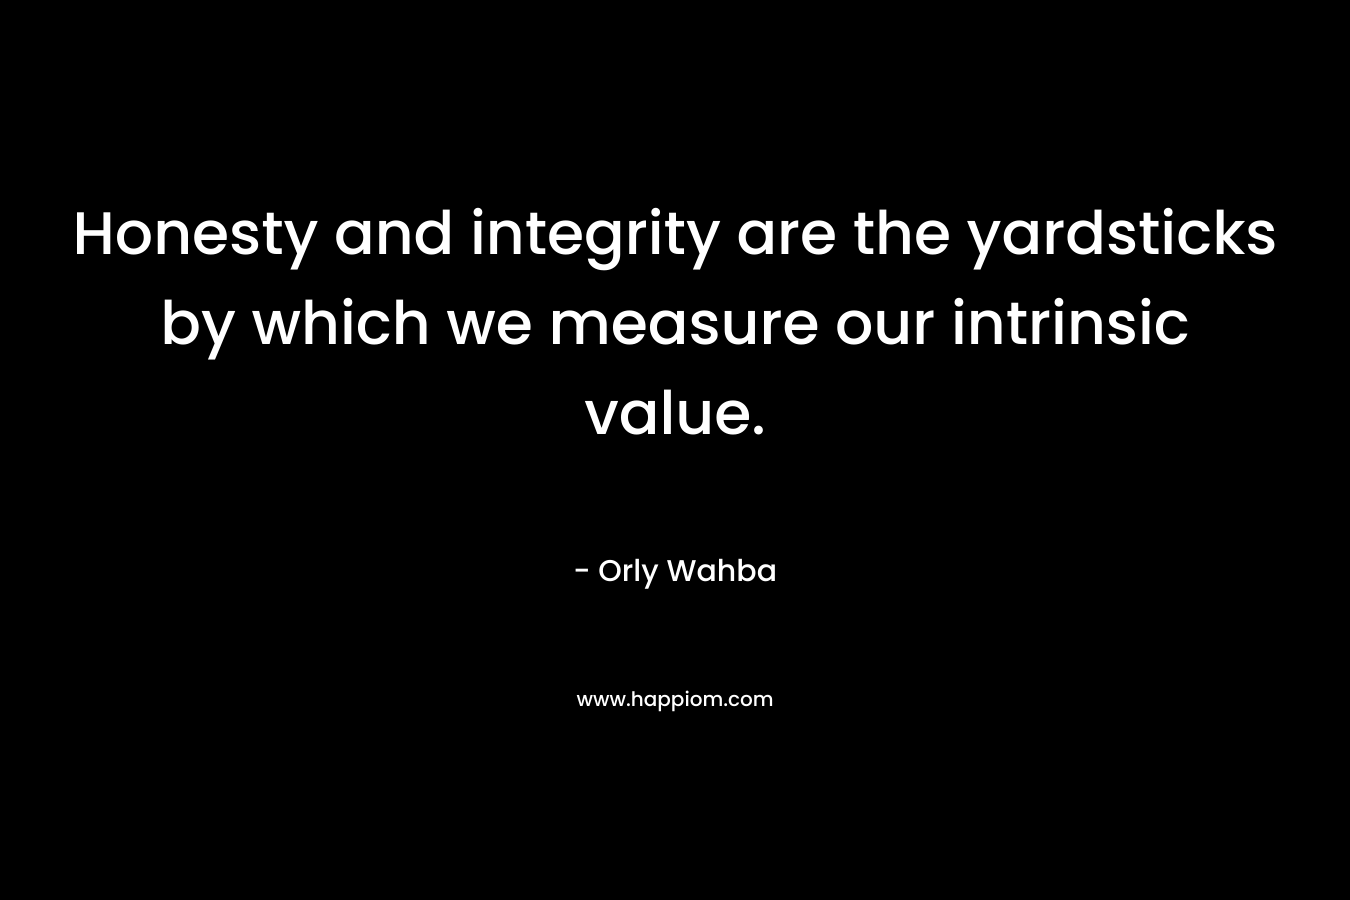 Honesty and integrity are the yardsticks by which we measure our intrinsic value.